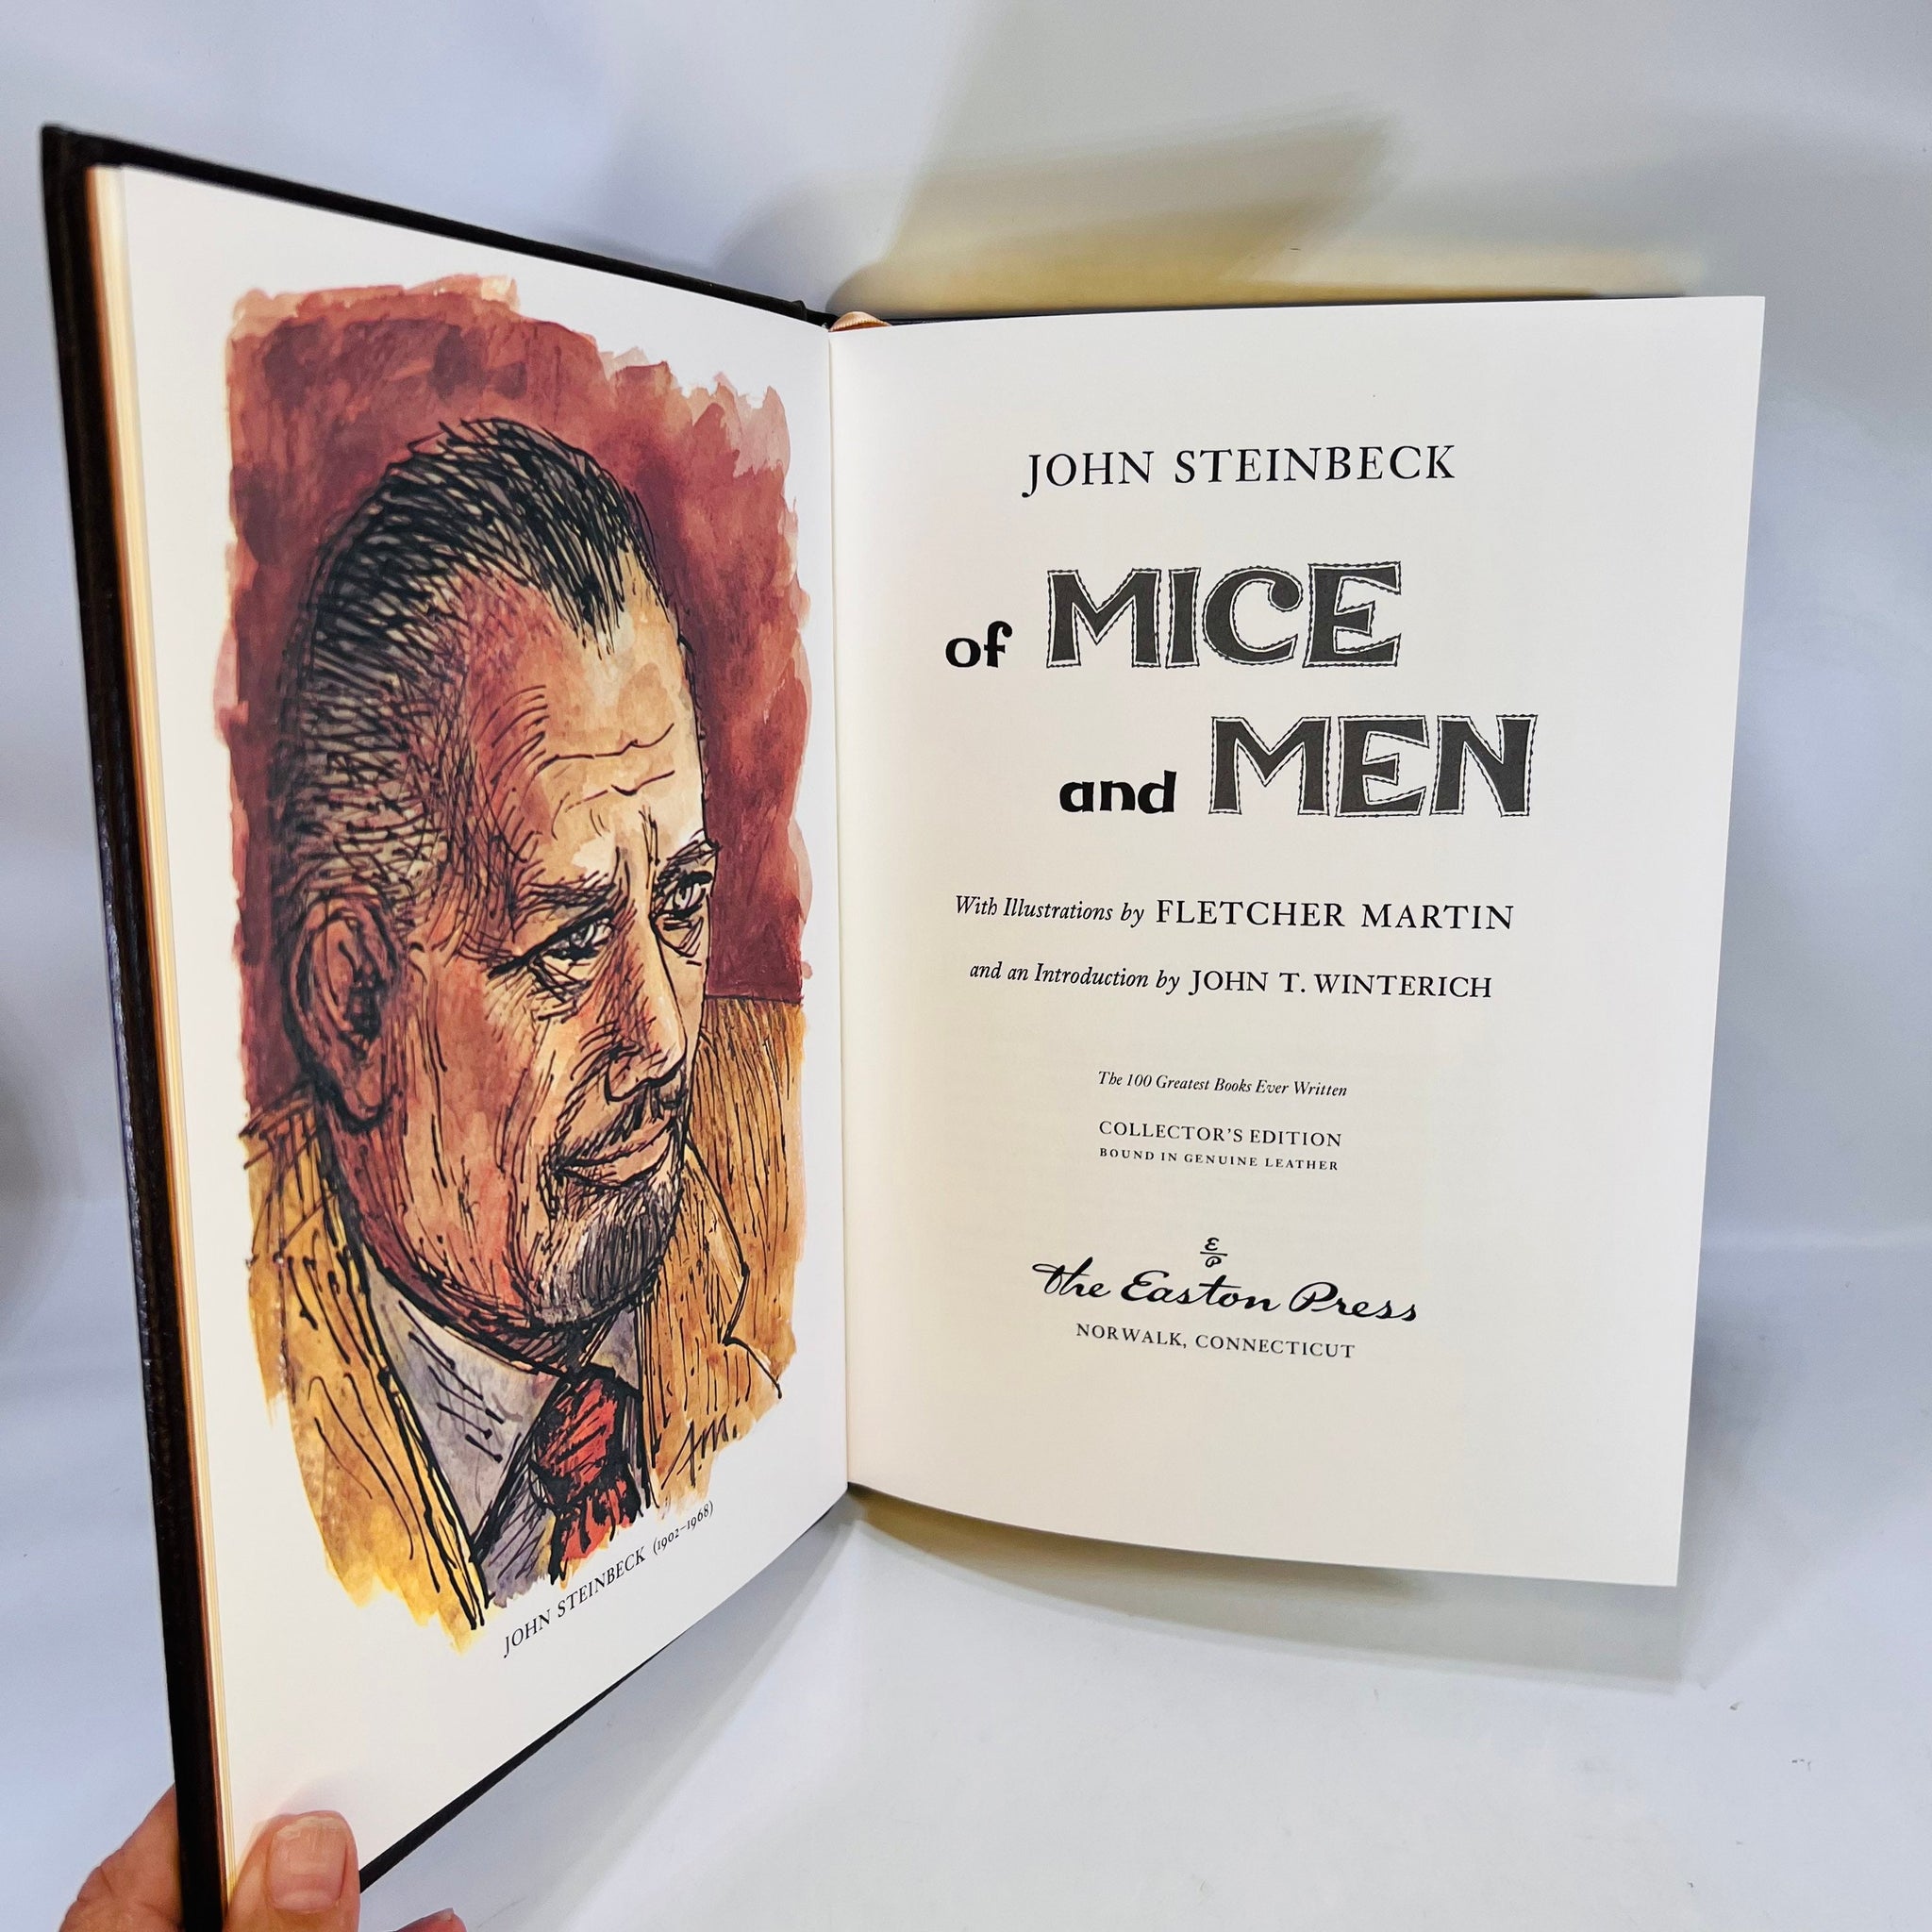 of mice and men book cover art